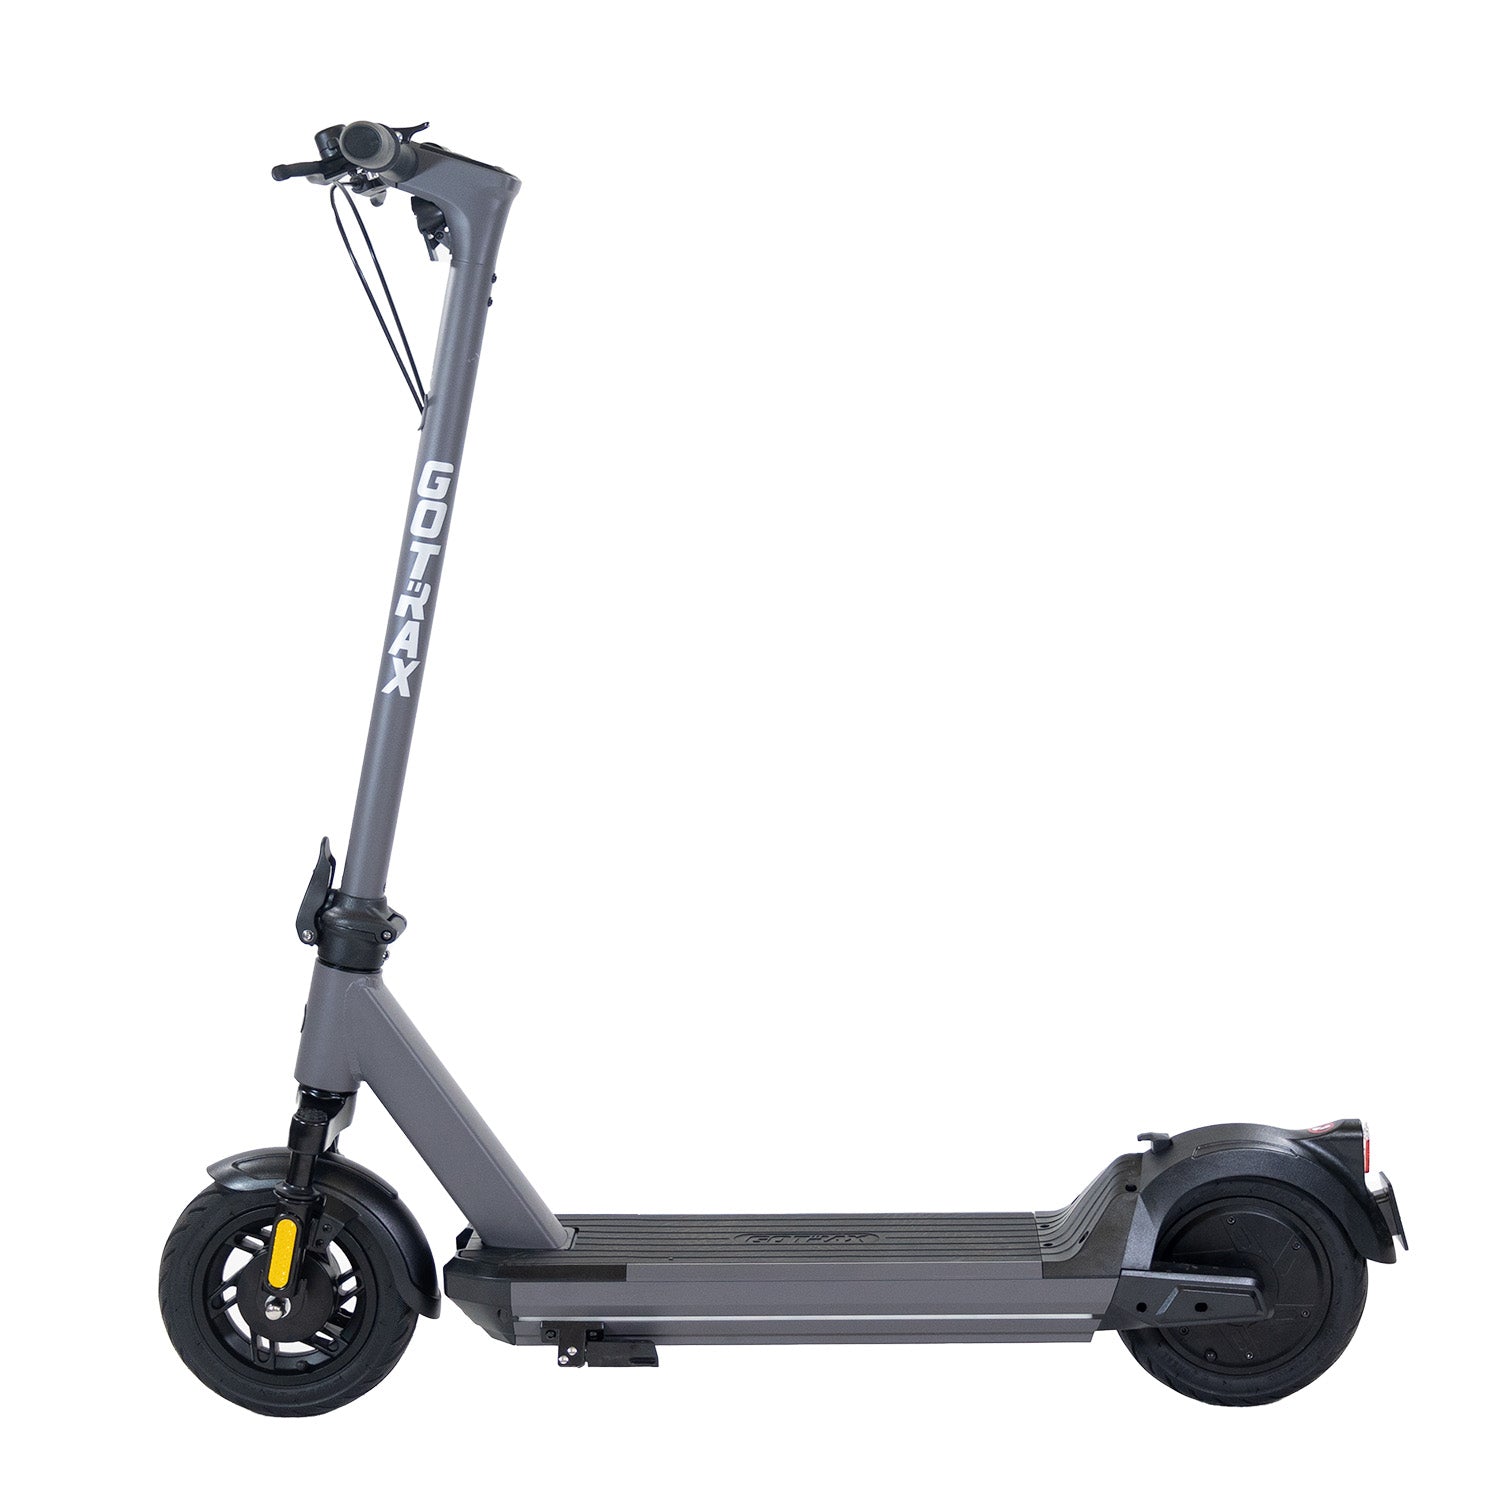 G6 Electric Scooter - GOTRAX